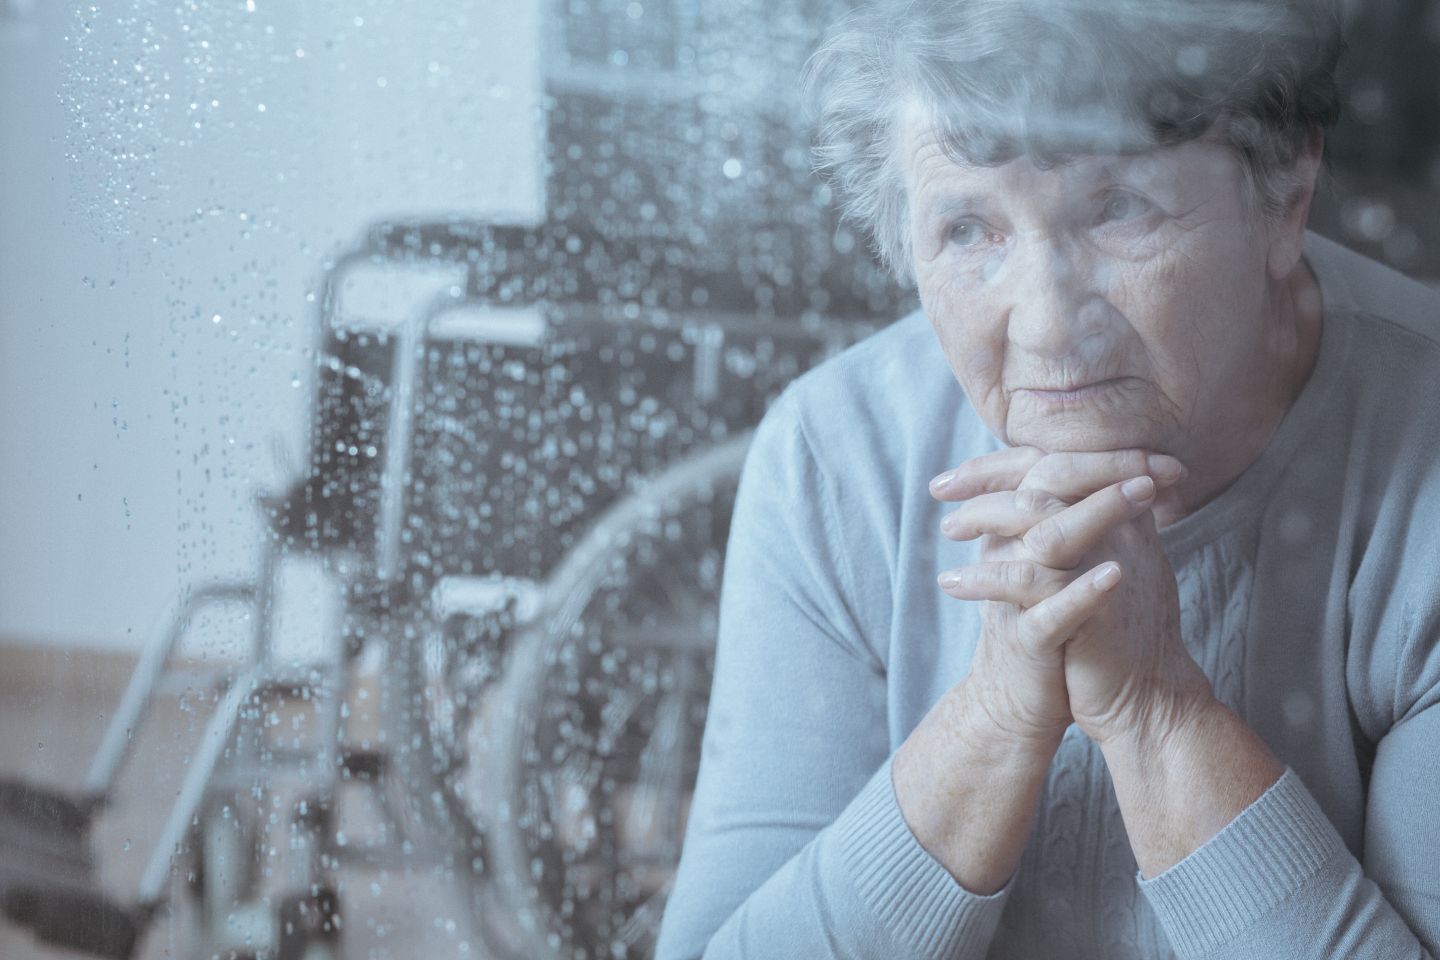 Elderly white woman with sad look on her face, hands folded with chin resting on them, looking out a window with a wheelchair in the background